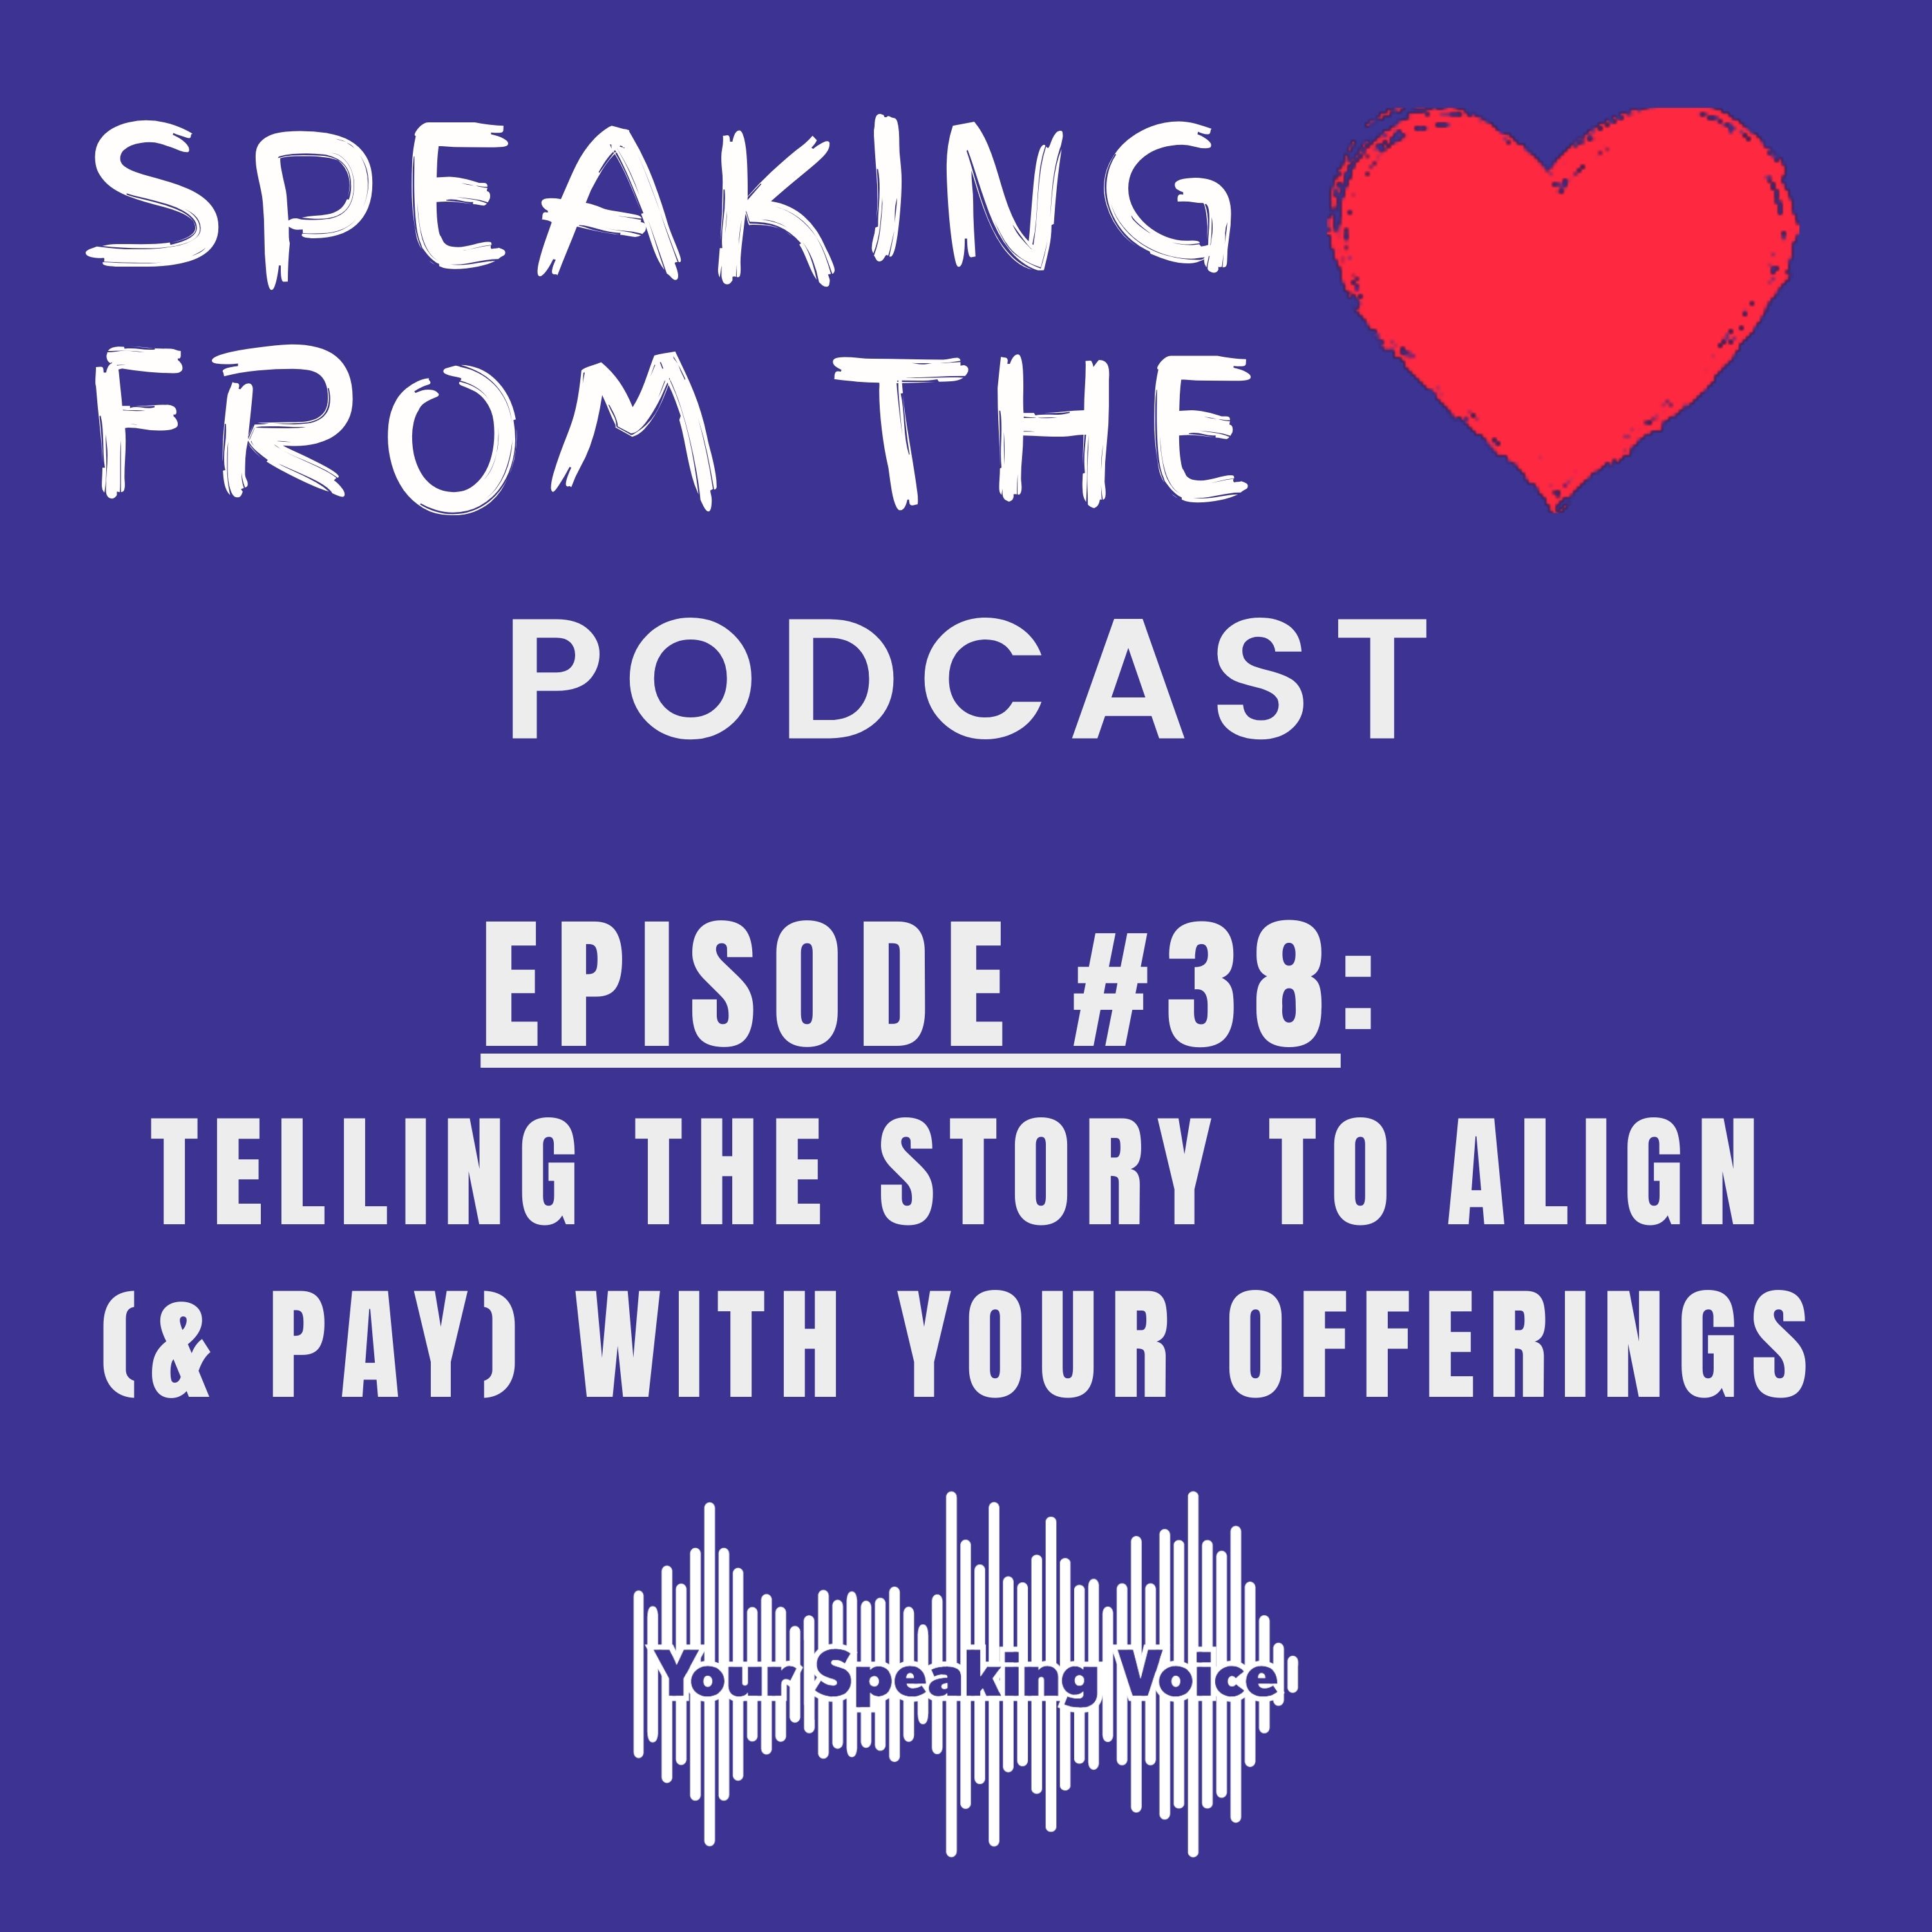 Episode #38 – Telling The Story To Align (& Pay) With Your Offerings